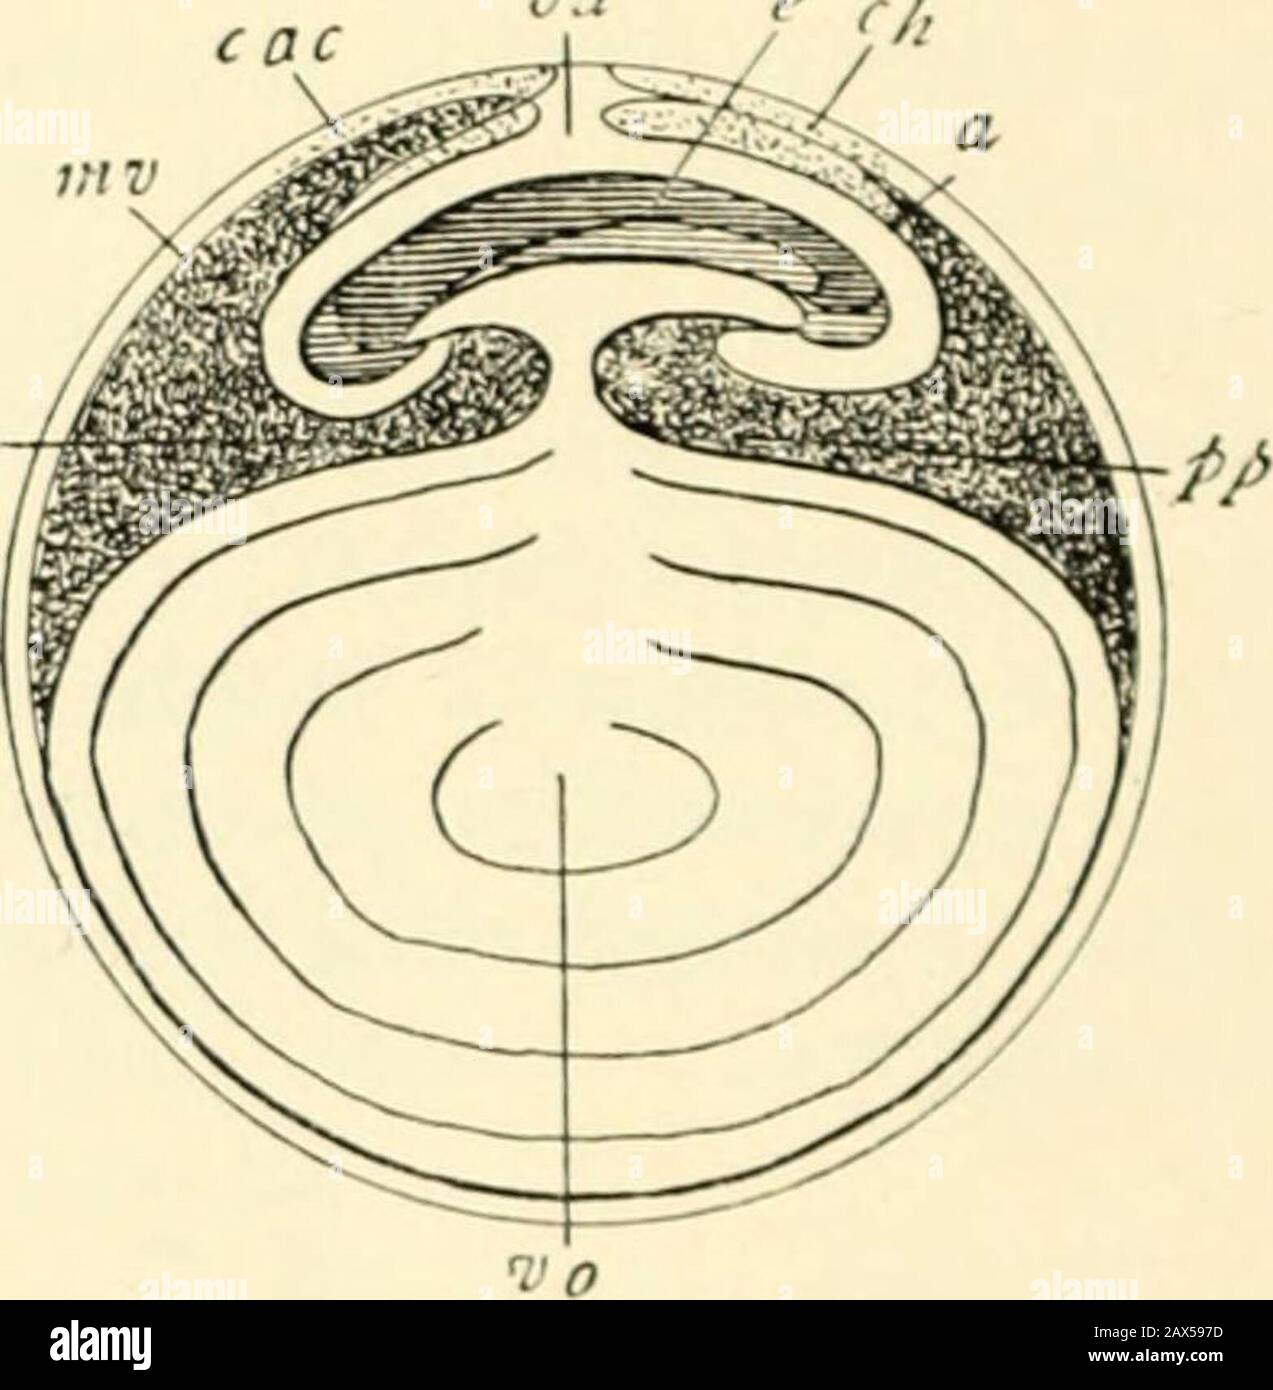 A textbook of obstetrics . Fig. 70.—e, Embryo ; ec, cephalicextremity; eg, caudal extremity; catca, amniotic hood ; //, pp, pleuroperi-toneal cavity; j, umbilical vesicle.. Fig. 71.—r. Embryo; a, amnion; oa, amniotic umbilicus; cac, amnio-chorional cavity ; pp, pp, pleuroperito-neal cavity; ch, chorion; mv, vitel-line membrane; vo, umbilical vesicle. reinforcement from the middle layer of cells, or the mesoderm.As now the embryo begins to assume a definite shape, and thelateral walls begin to fold in toward one another, and the caudalextremity approaches a little to the cephalic end of the emb Stock Photo